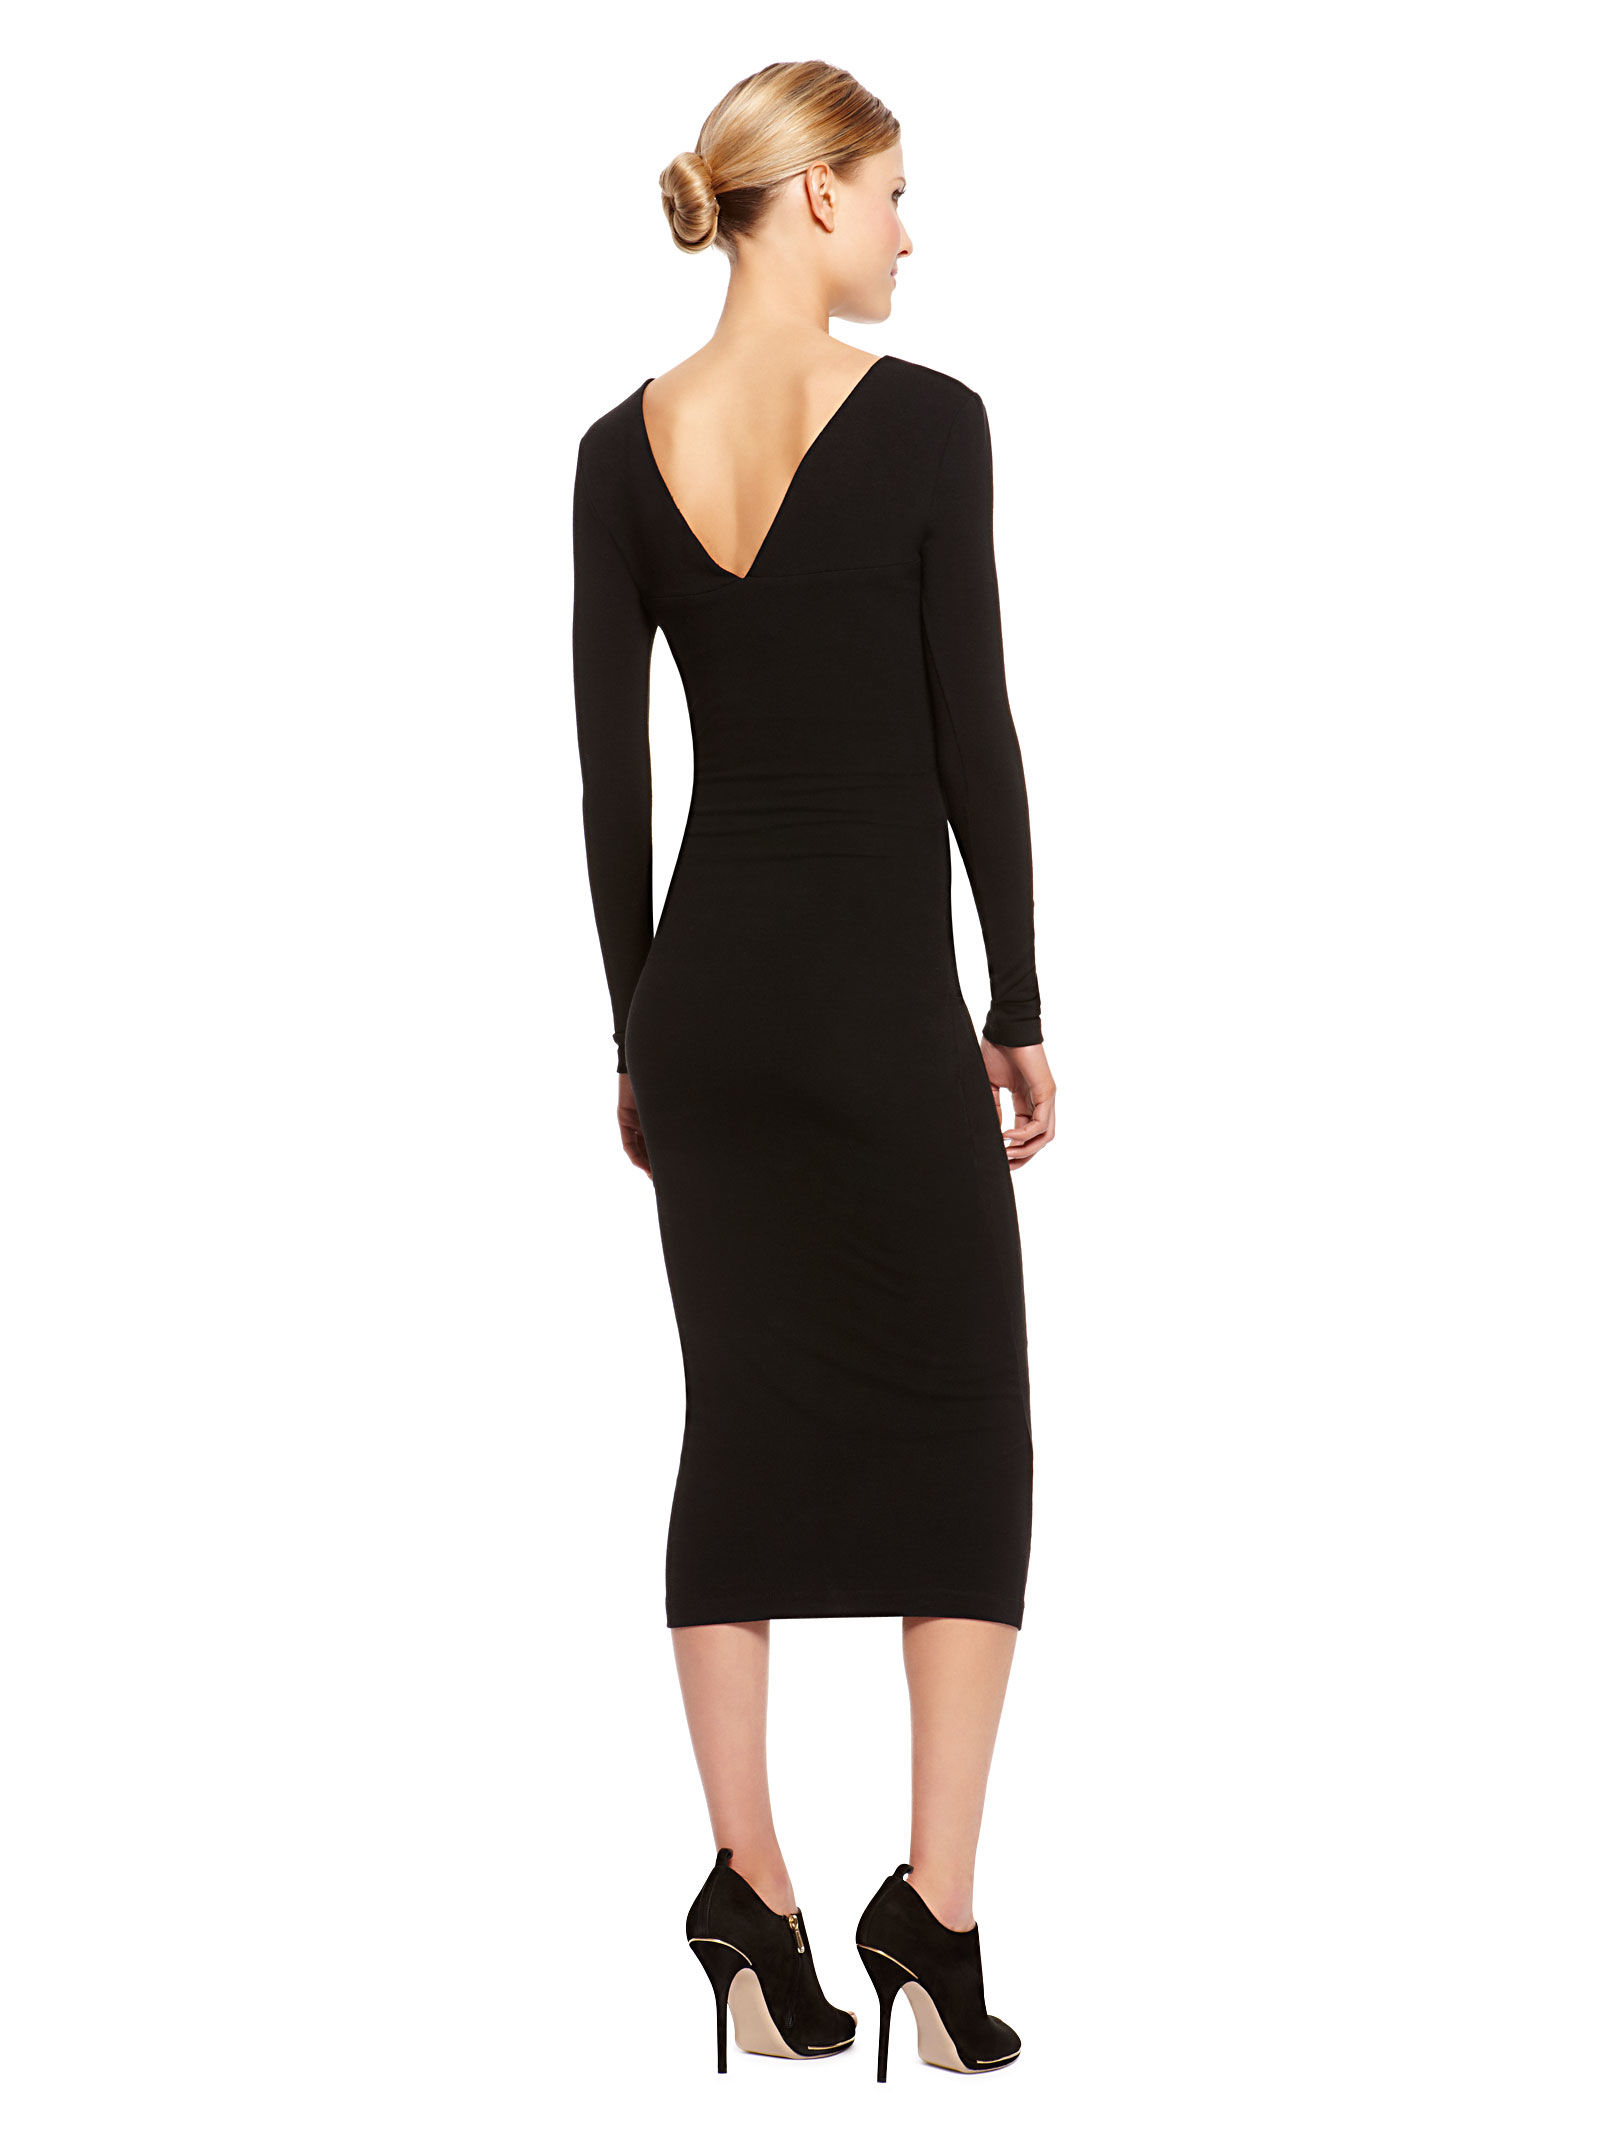 Donna Karan New York Double Slash Dress with Leather in Black | Lyst